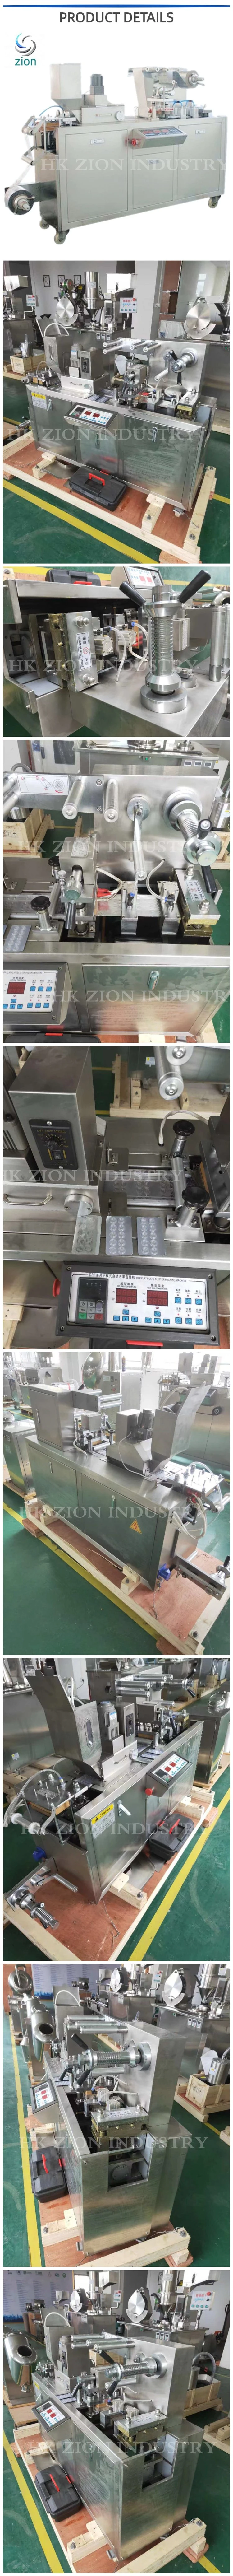 High Speed Vitamins Candies Capsules Tablets Blister Packing Machine Hony Butter Ketchup Blister Heat Sealing Machine Blister Cold Forming Machine